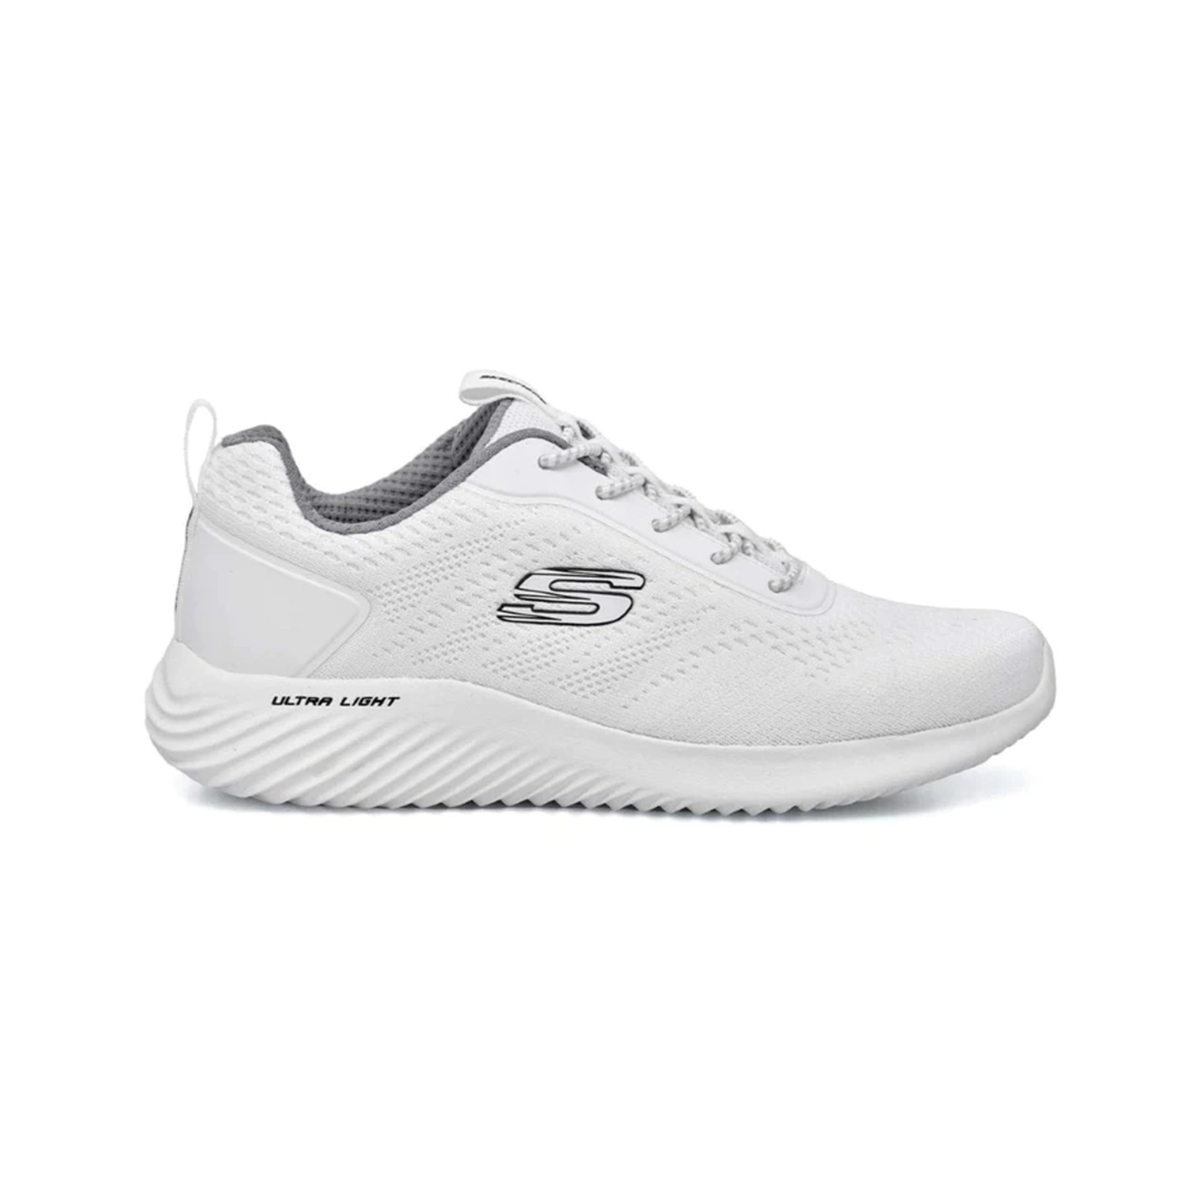 Skechers Sports Bounder Intread Shoes For Men, White